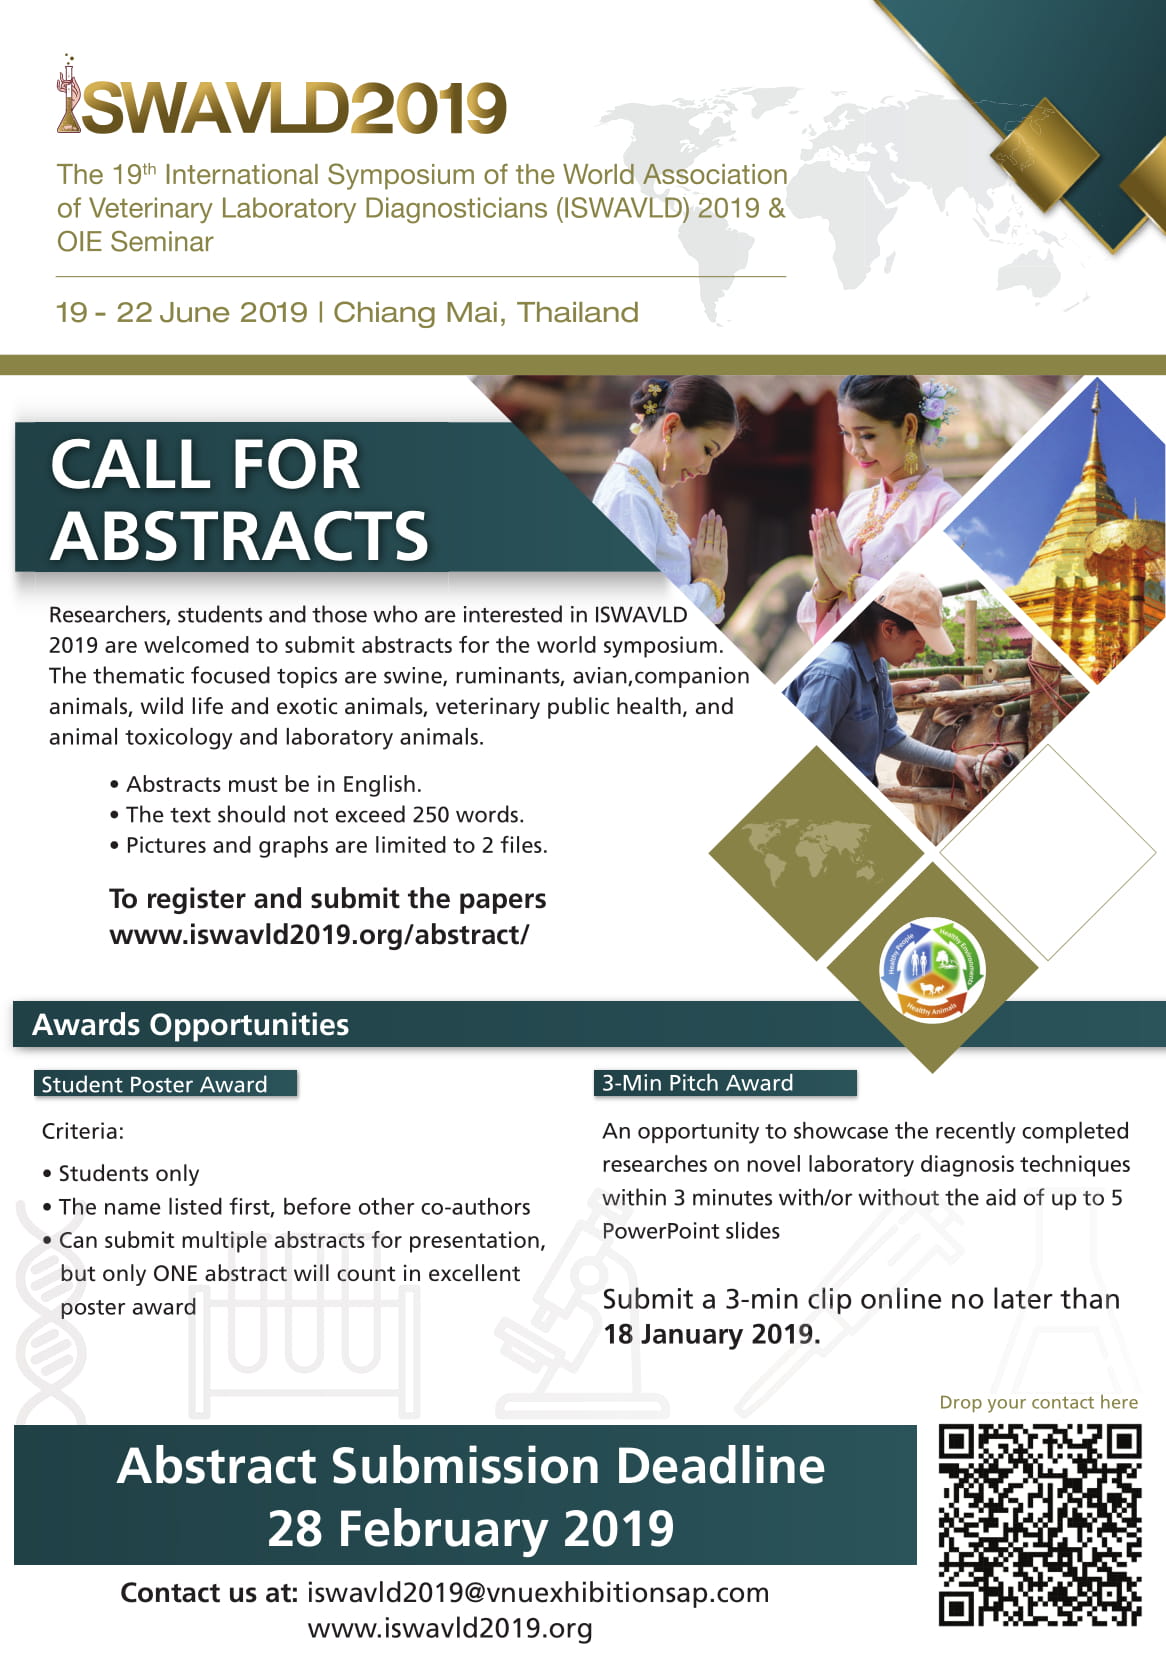 Call for Abstracts A5 1